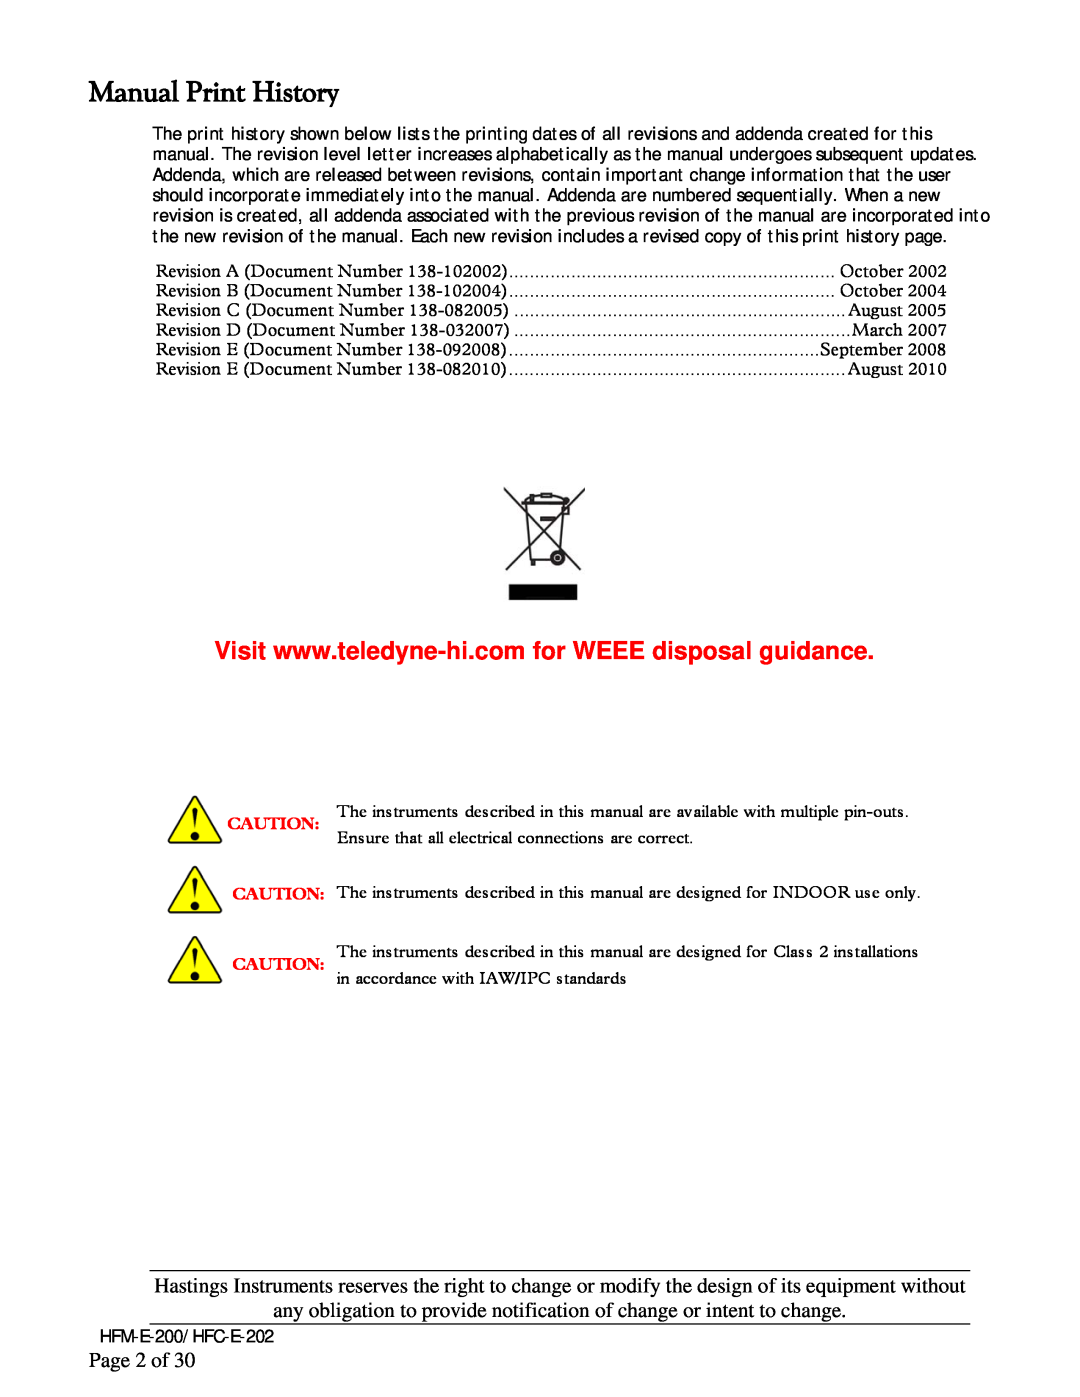 Teledyne HFC-E-202 Manual Print History, any obligation to provide notification of change or intent to change, Page 2 of 